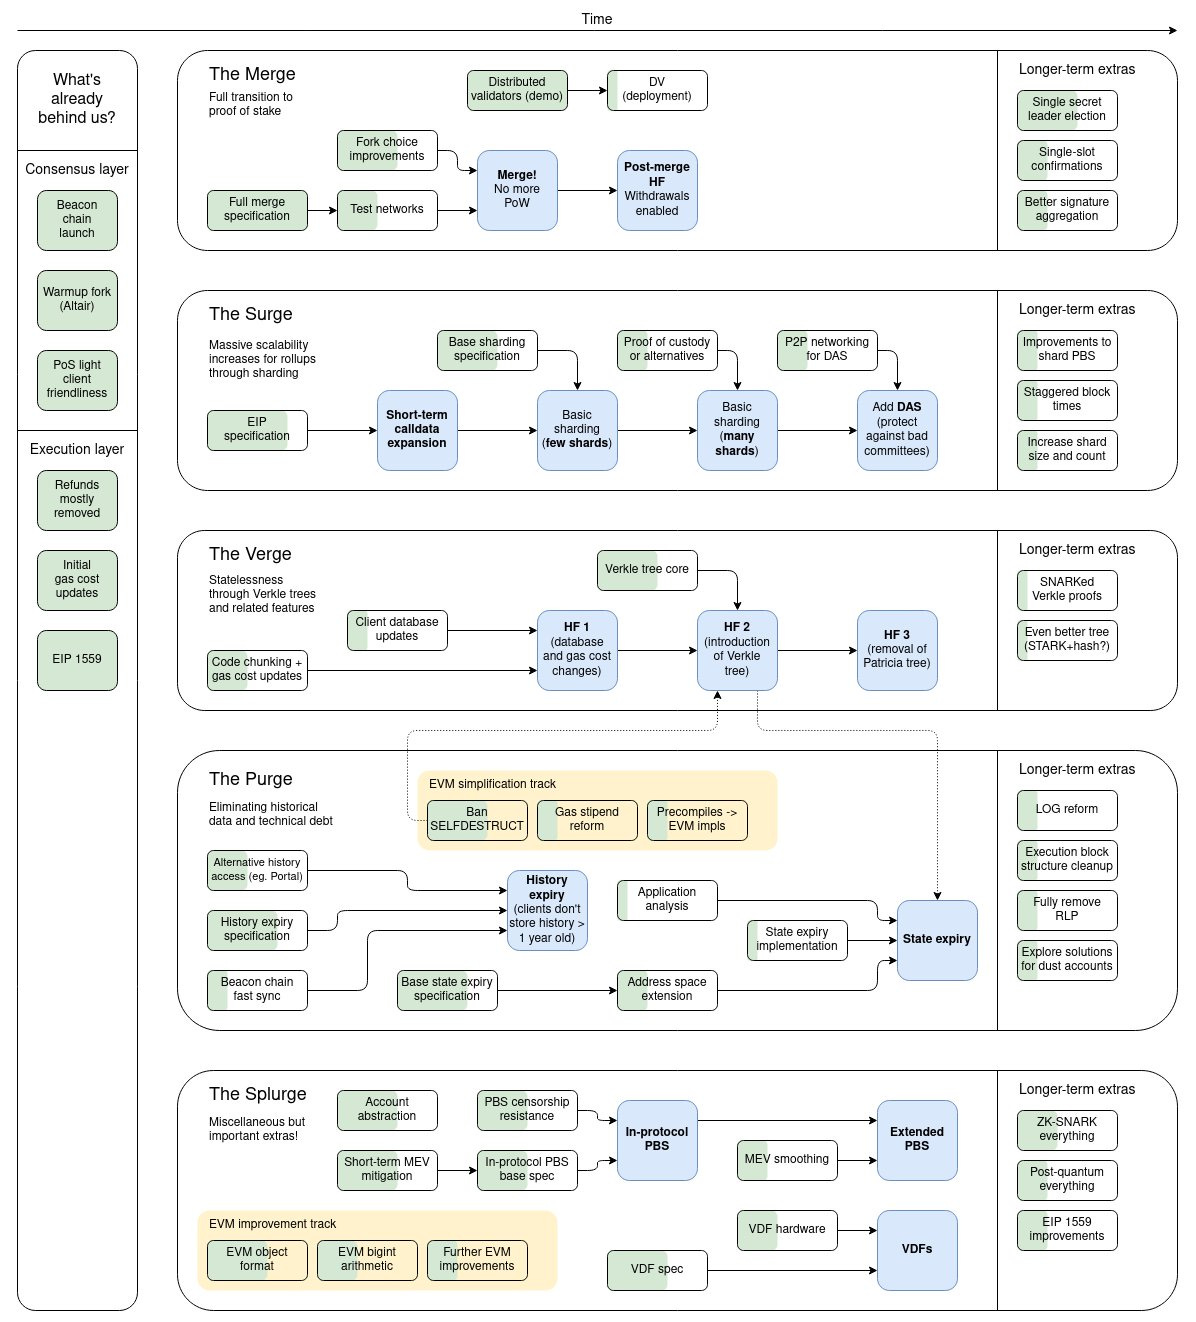 vitalik.eth on Twitter: "Happy birthday beacon chain! Here's an updated  roadmap diagram for where Ethereum protocol development is at and what's  coming in what order. (I'm sure this is missing a lot,